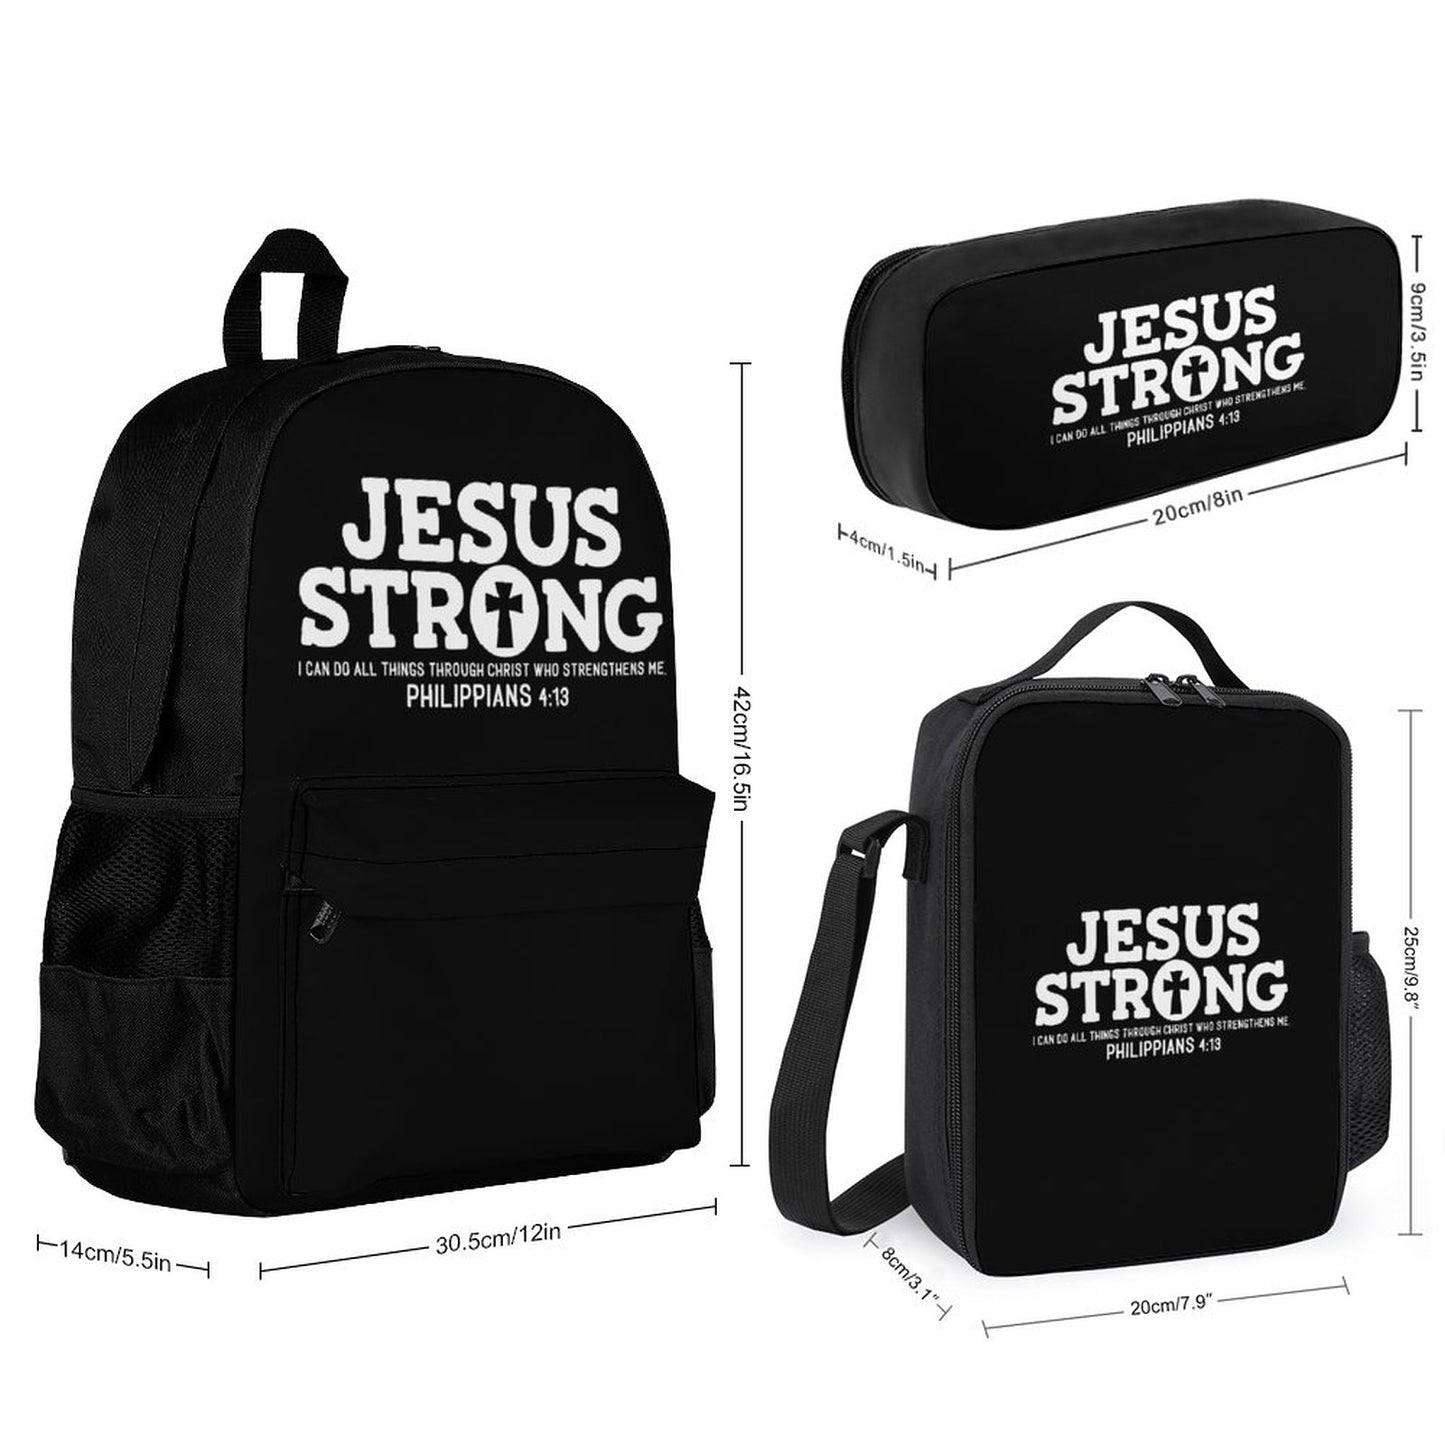 JESUS Strong I Can Do All Things Through Christ Christian Backpack Set of 3 Bags (Shoulder Bag Lunch Bag & Pencil Pouch)